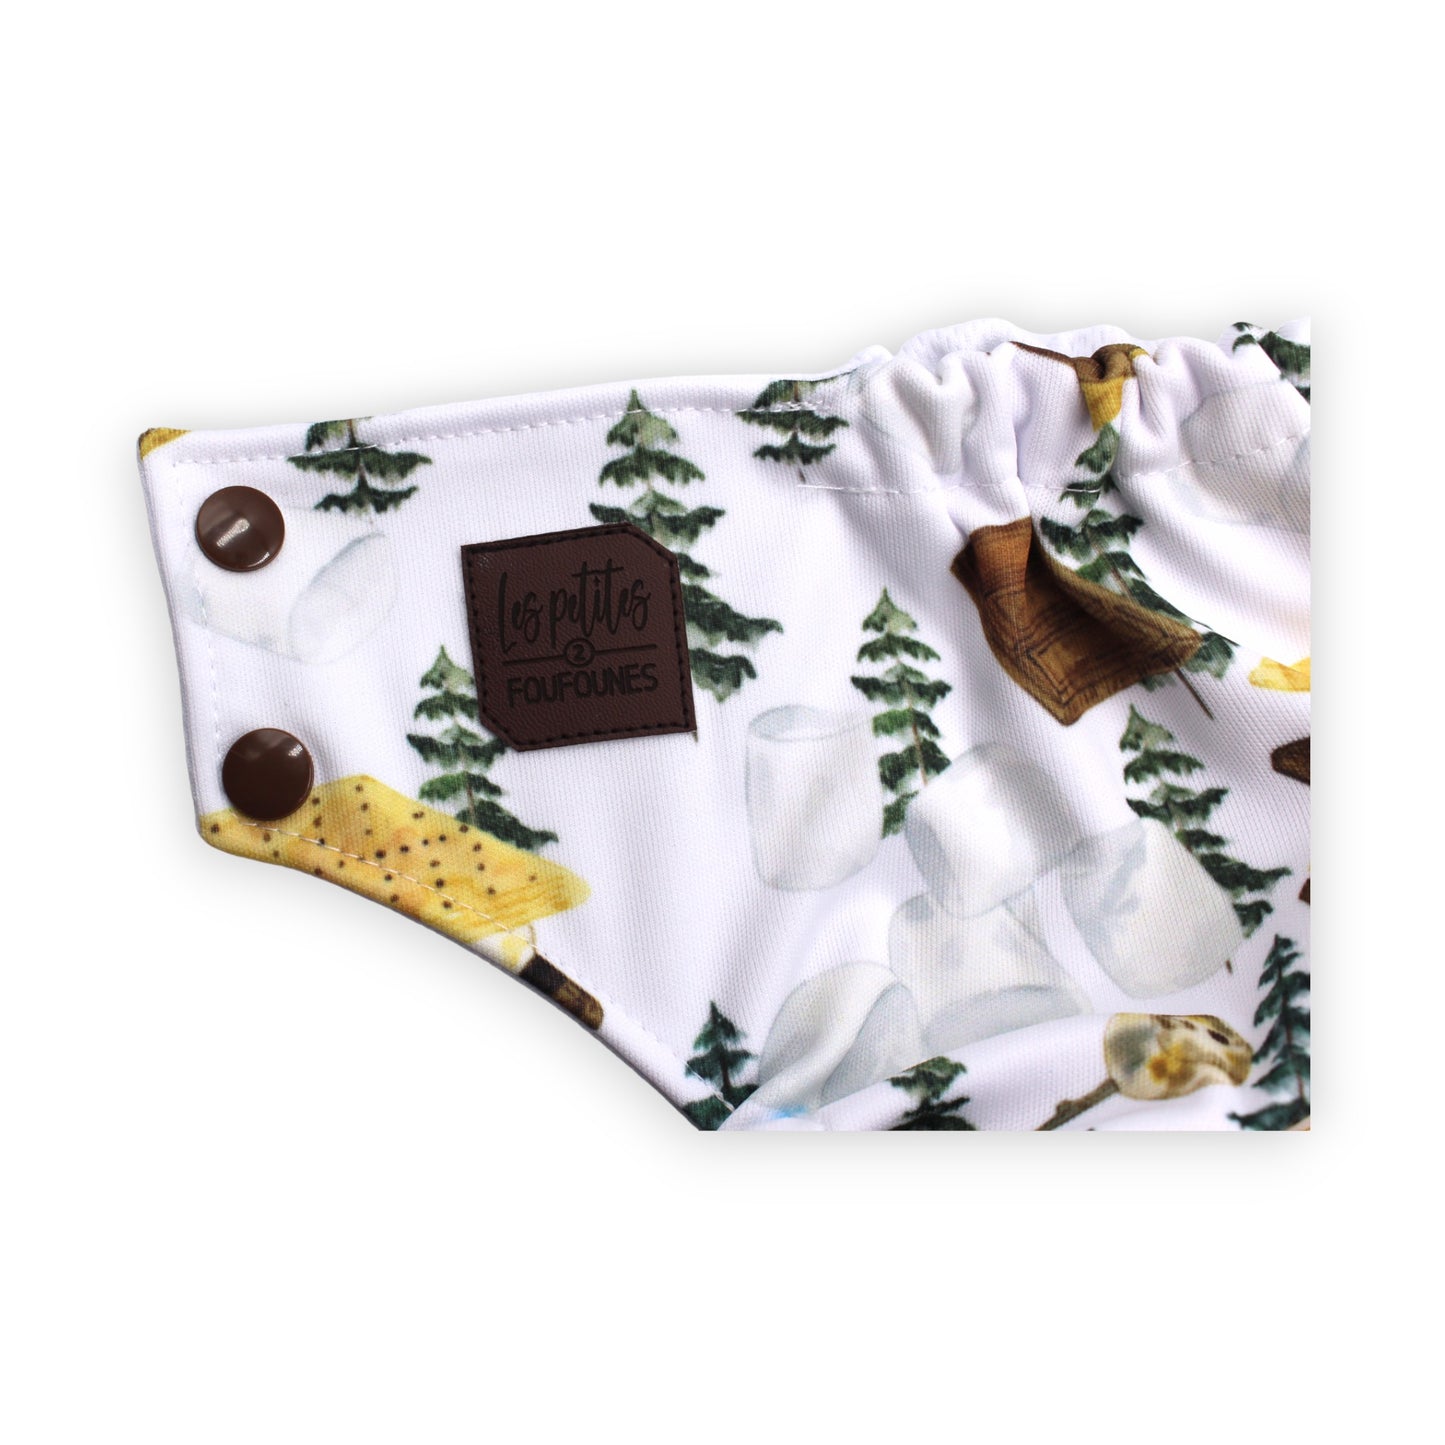 Couches - S'mores sapins FP (7184325607561)